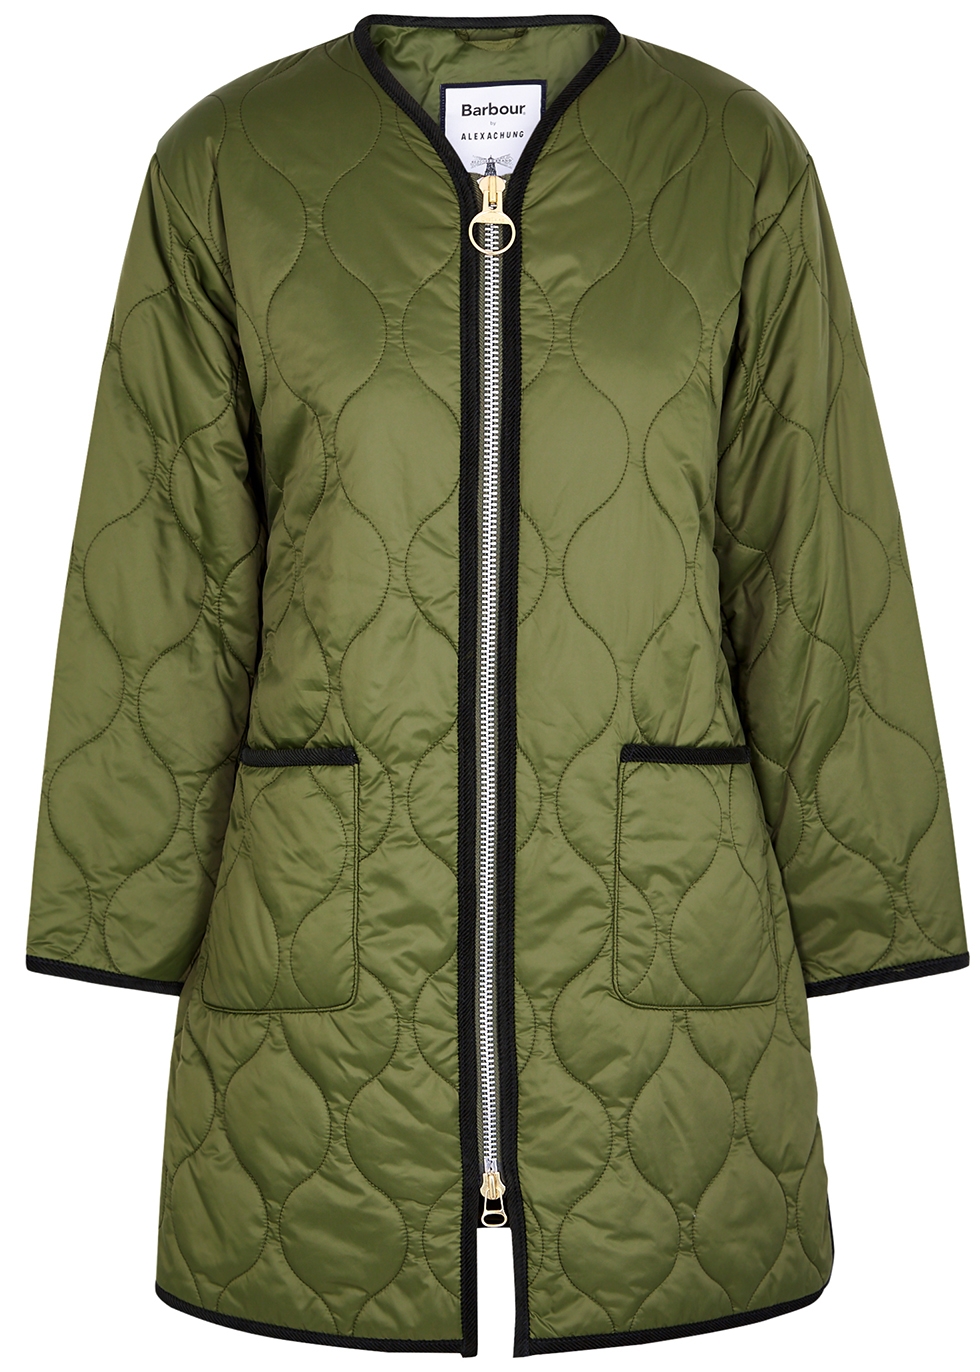 Barbour by ALEXACHUNG Billie green quilted shell jacket